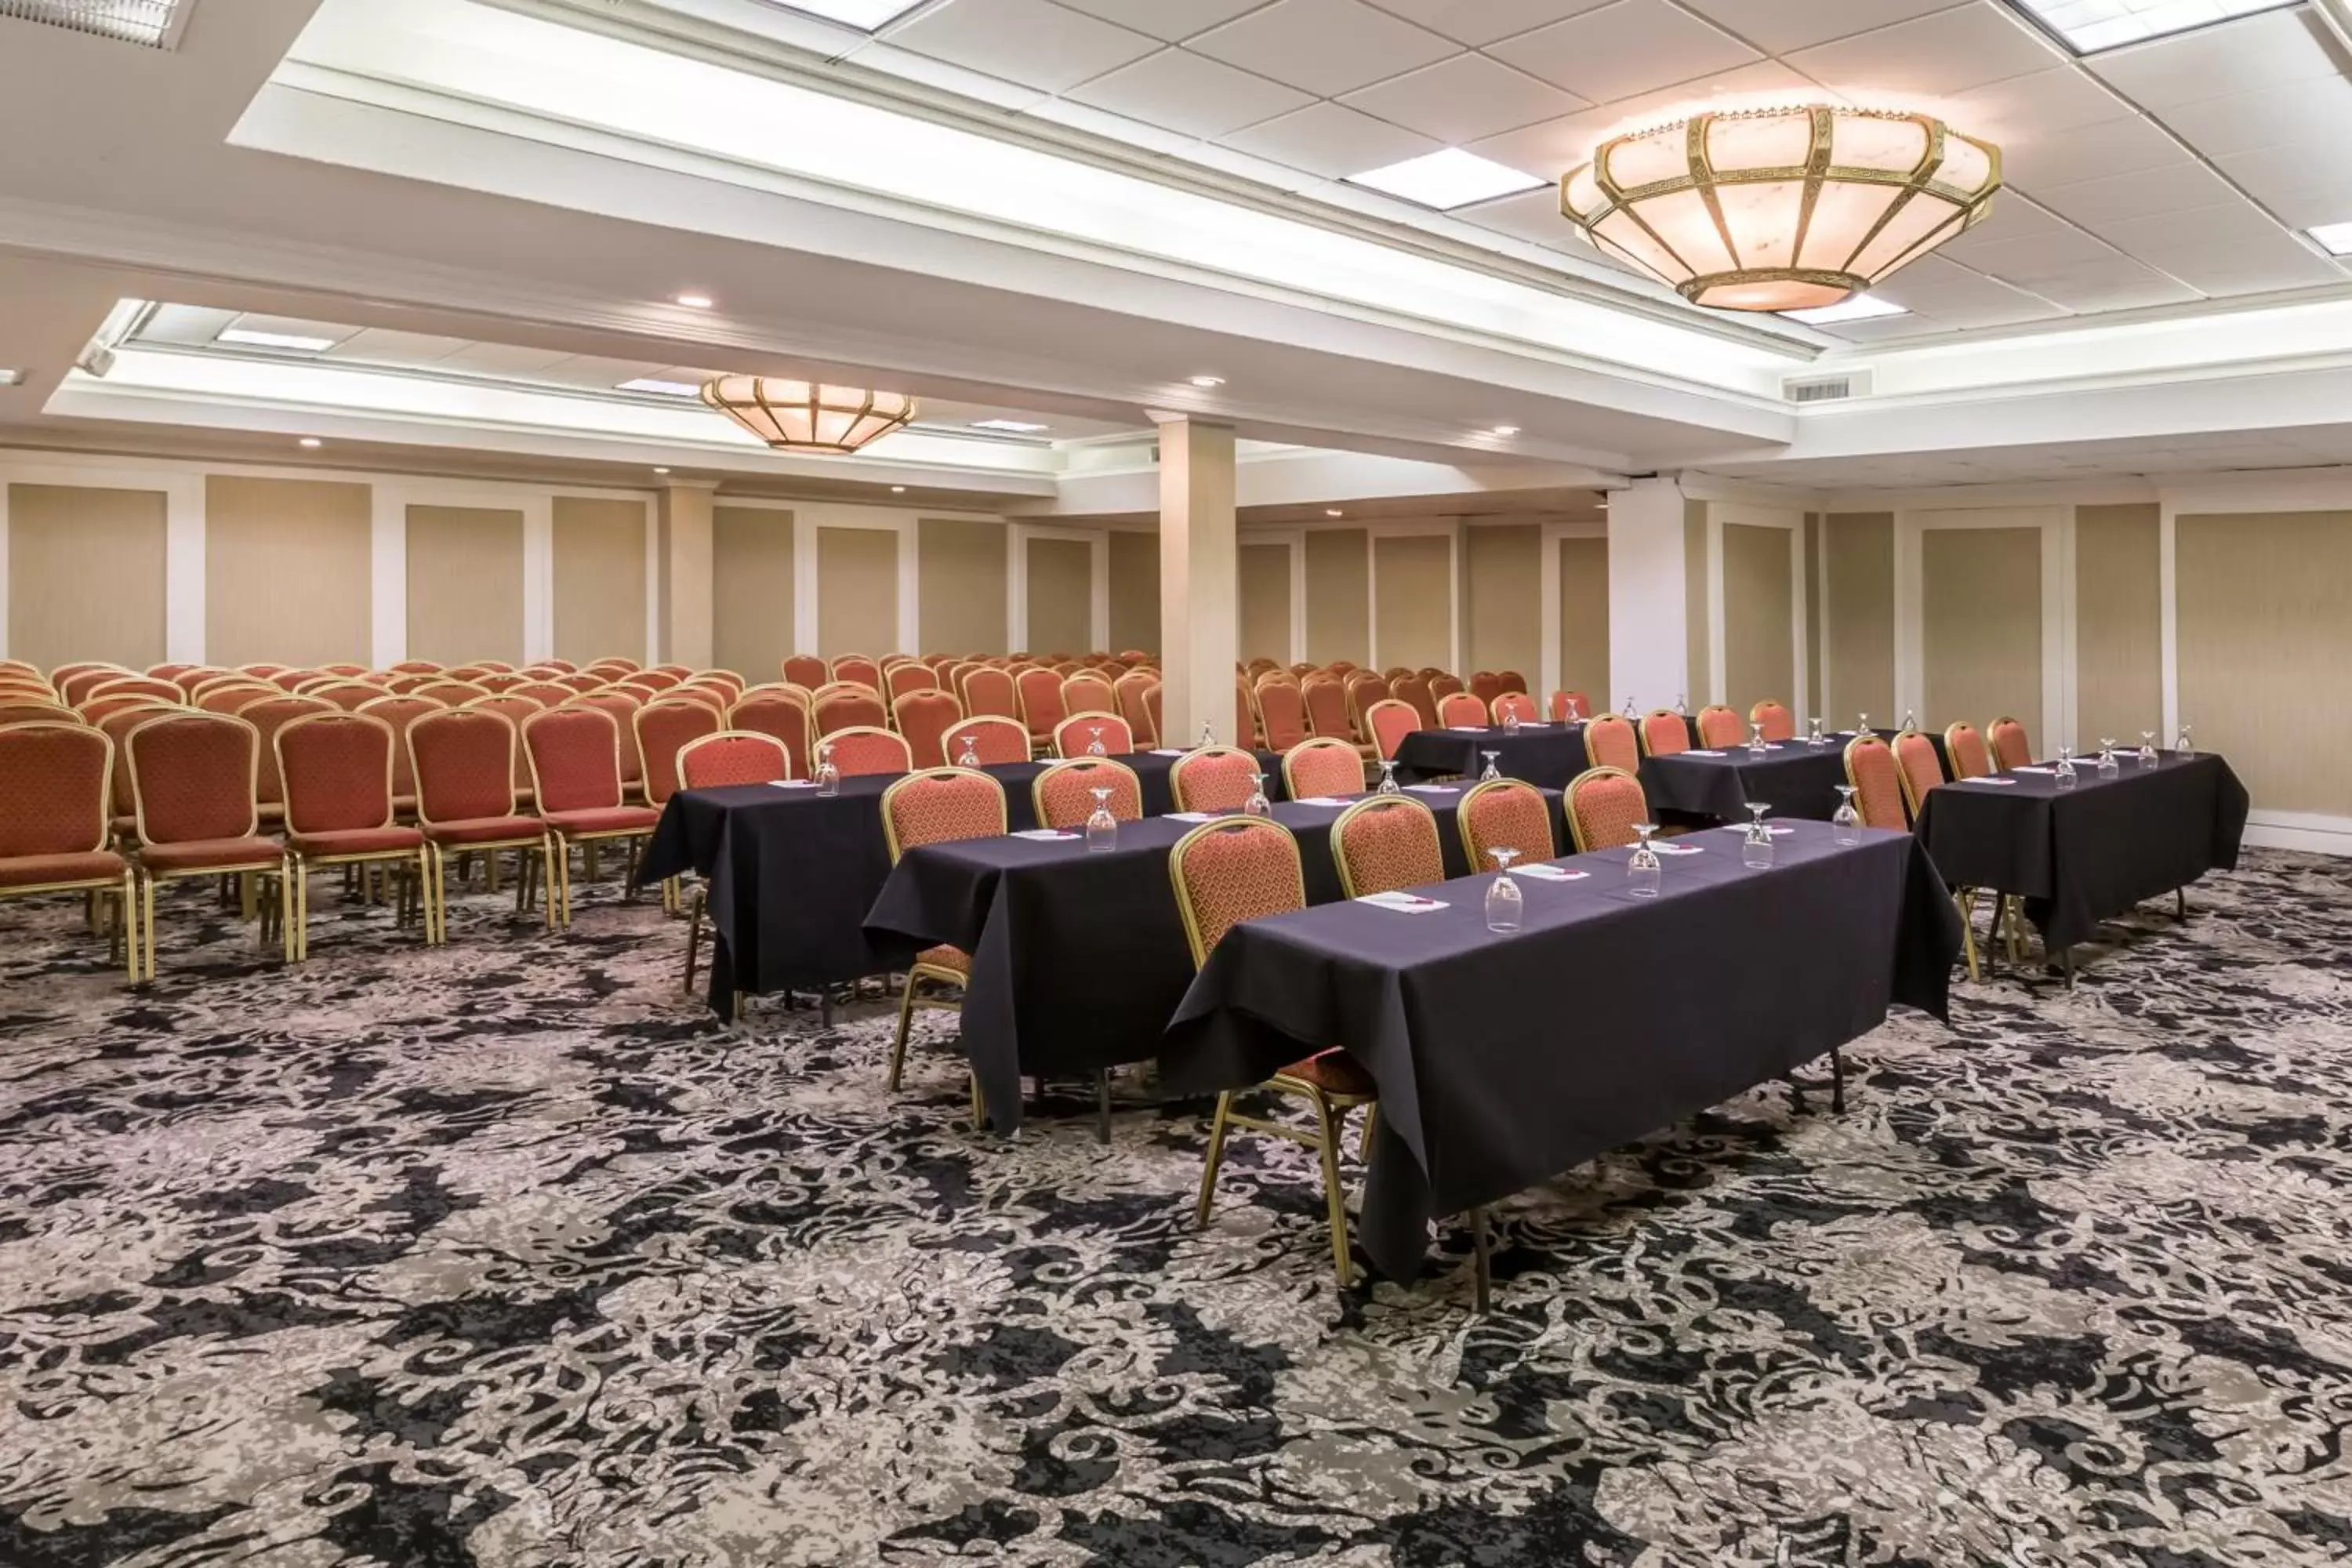 Meeting/conference room, Banquet Facilities in Wingate Houston near NRG Park/Medical Center